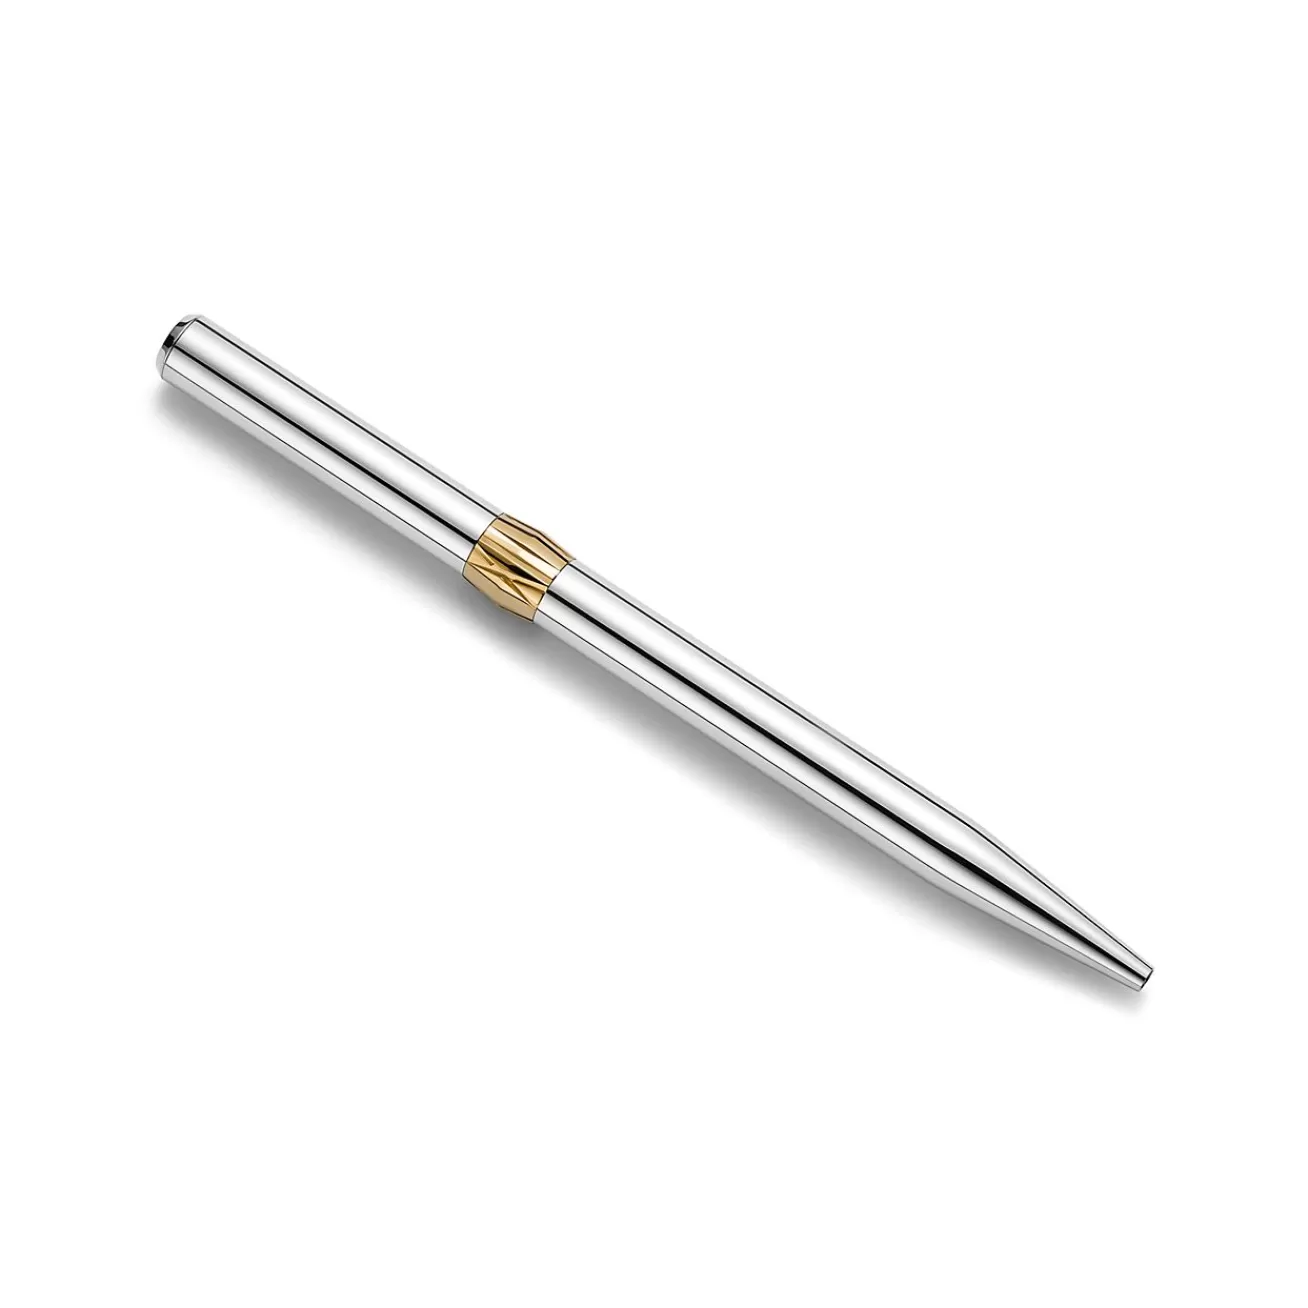 Tiffany & Co. Atlas® Ballpoint Pen in Sterling Silver with Gold Vermeil | ^ Stationery, Games & Unique Objects | Games & Novelties